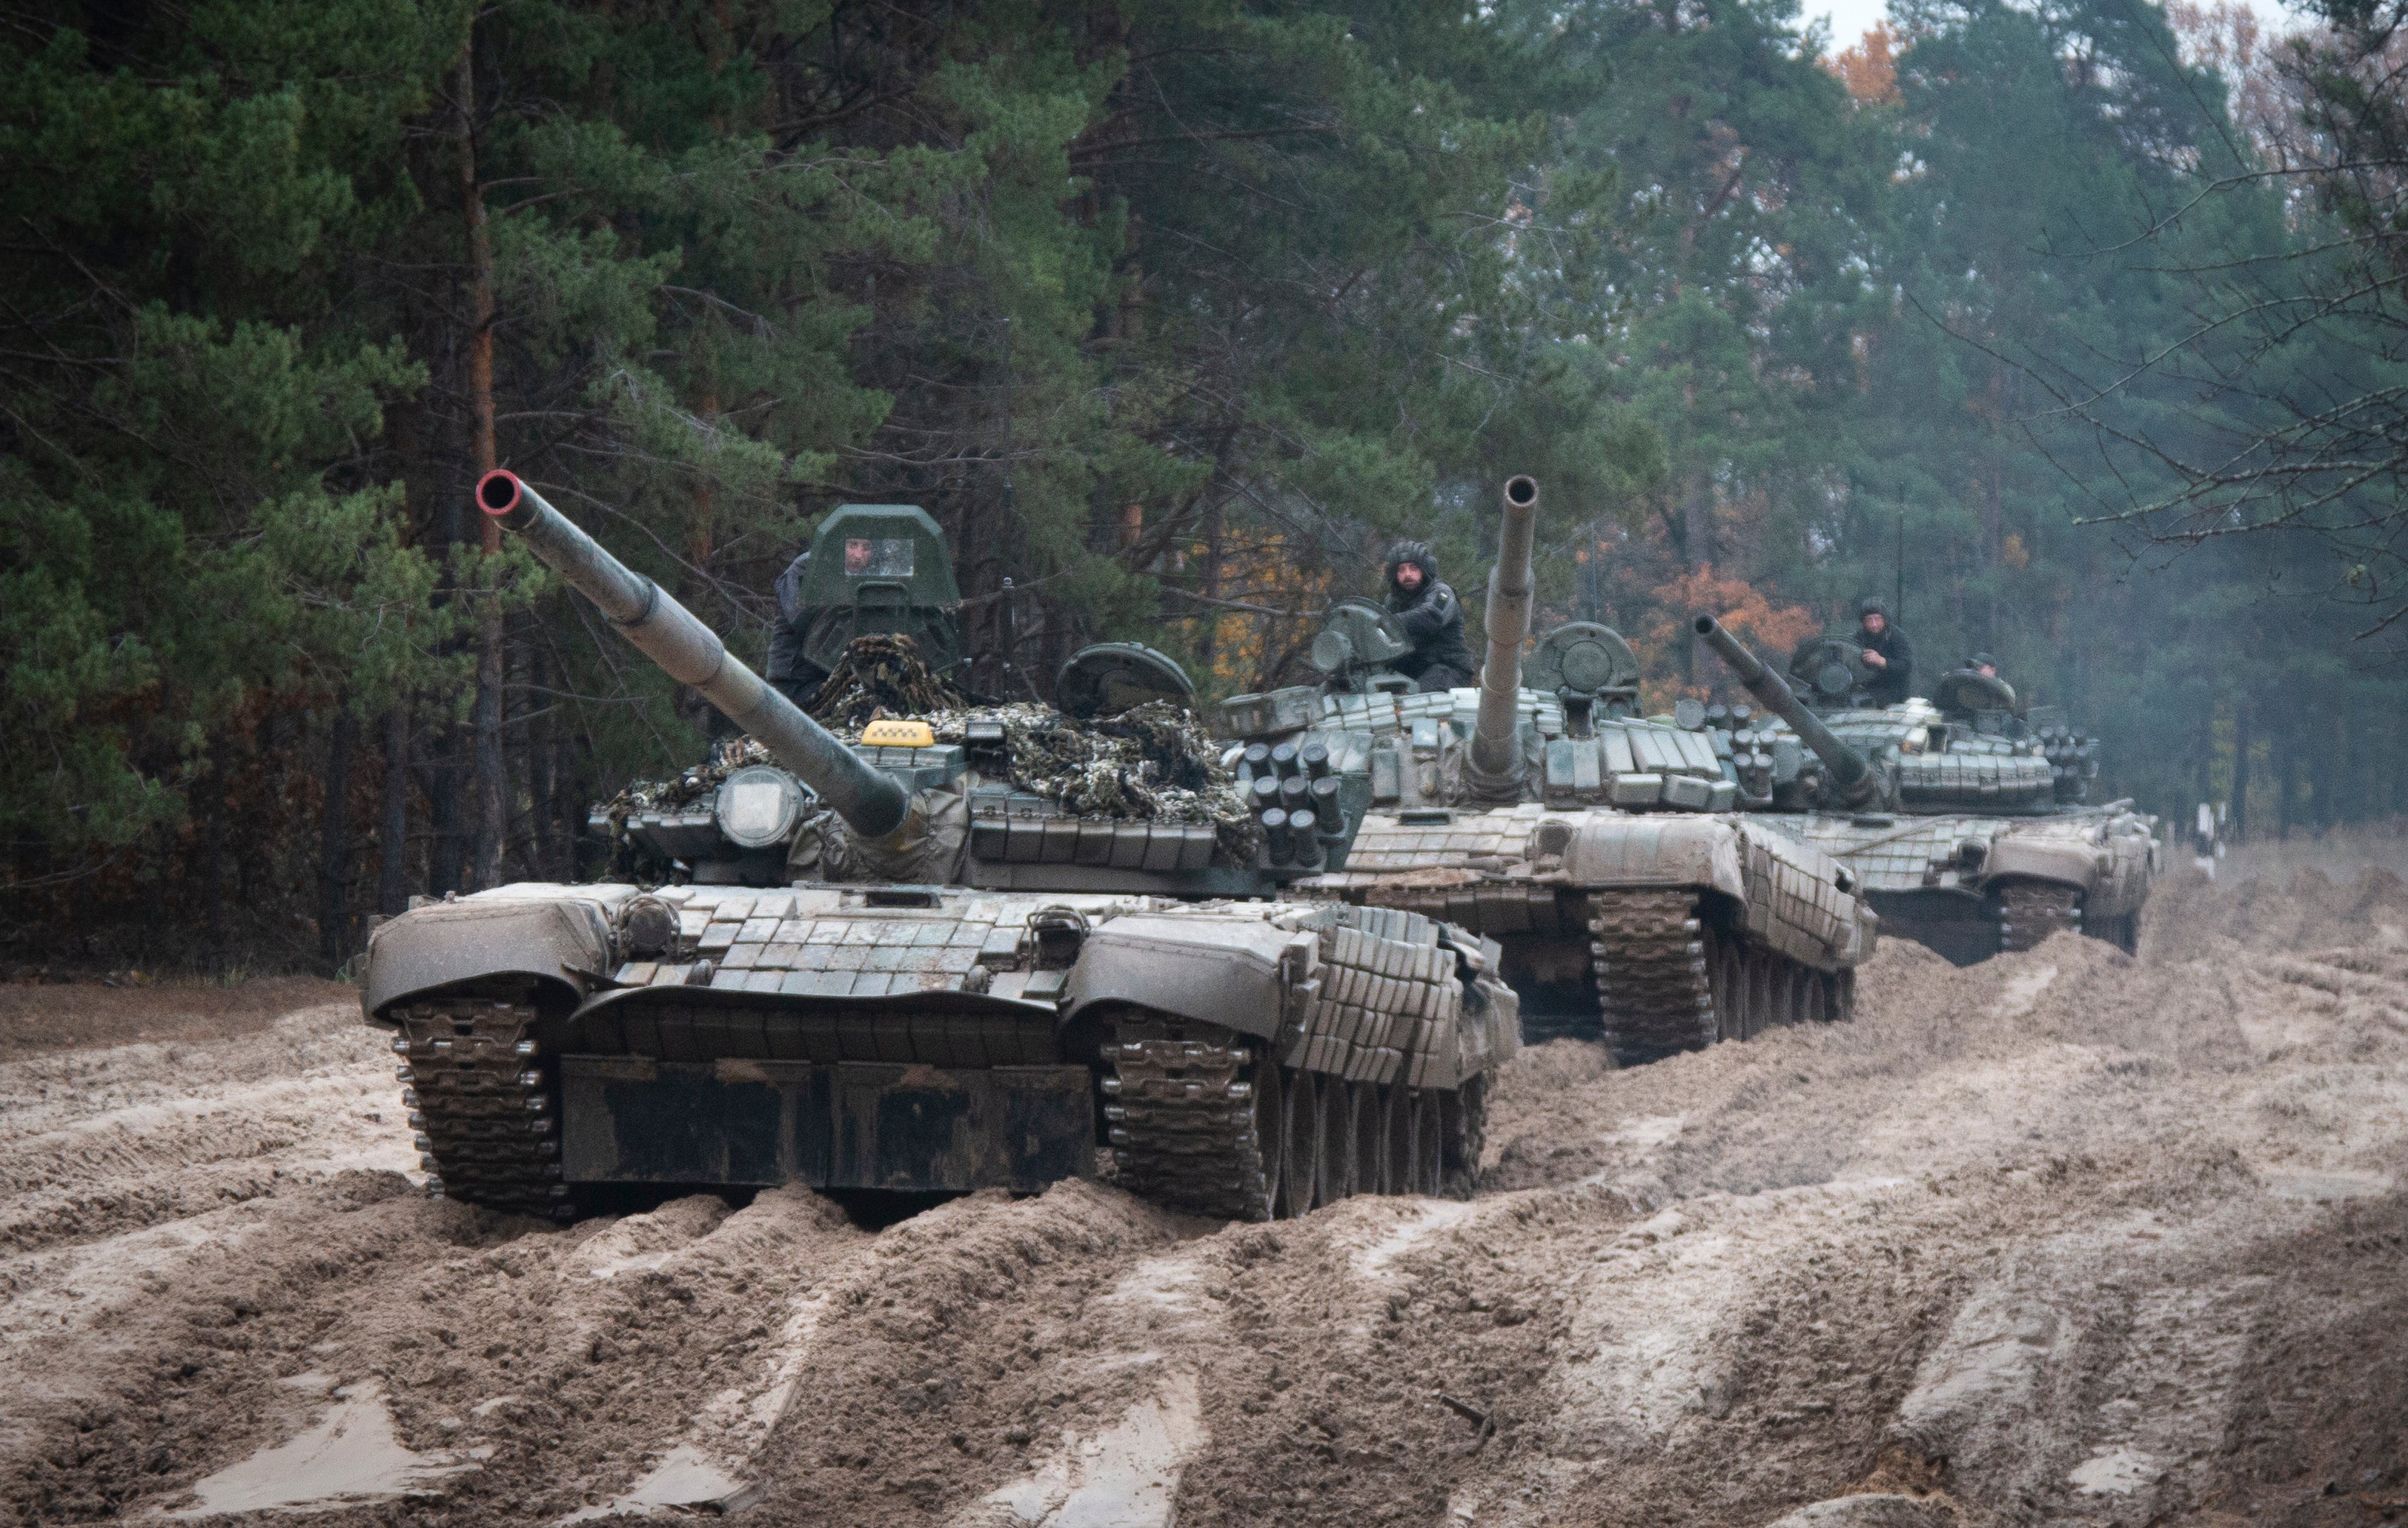 Ukrainian soldiers in captured Russian tanks T-72 hold military training close to the Ukraine-Belarus border